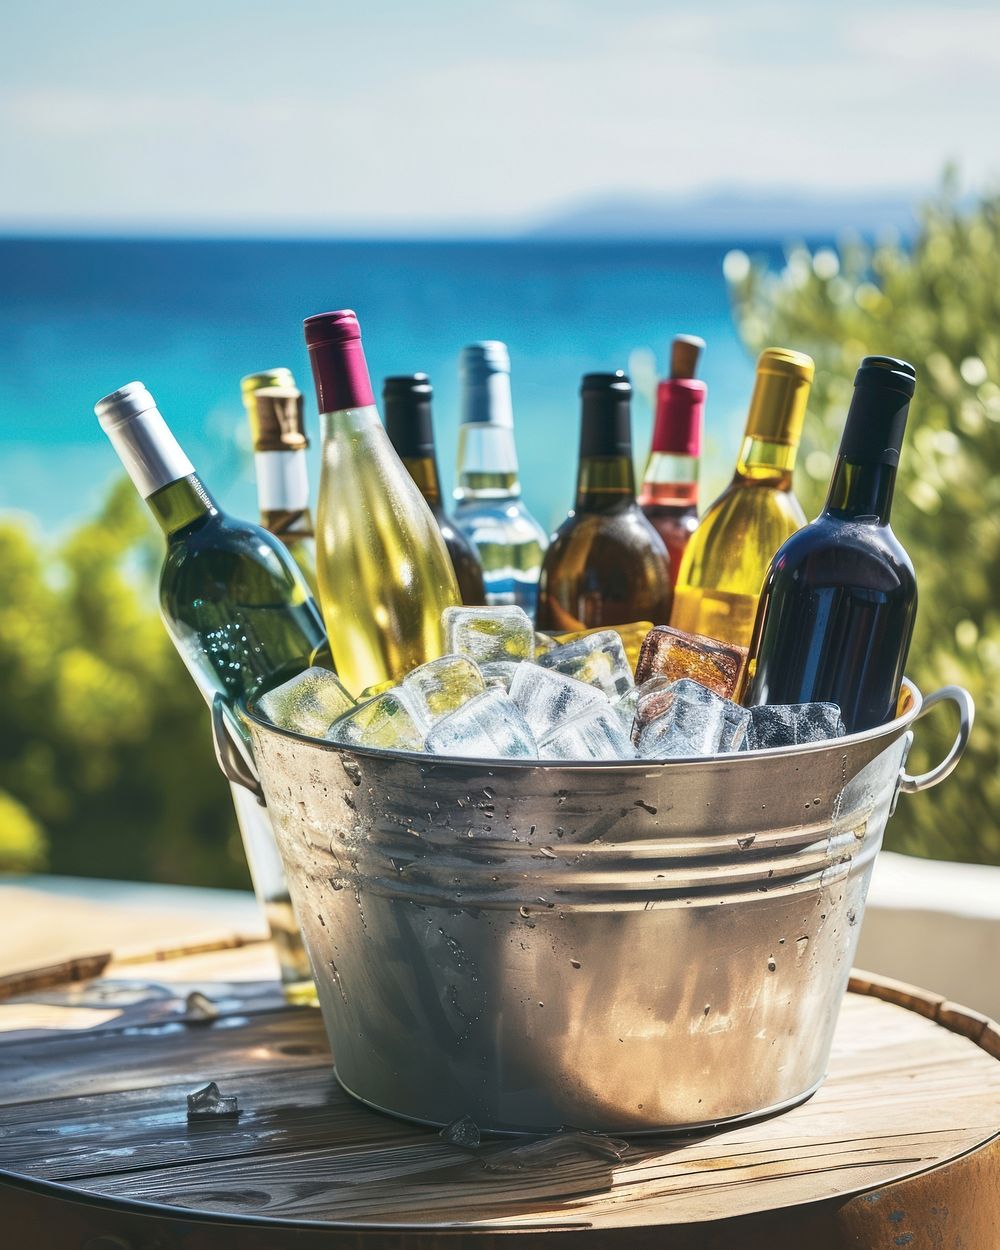 Assorted wine bottles in a metal bucket full of ice put on wood table against beach view outdoors summer drink.